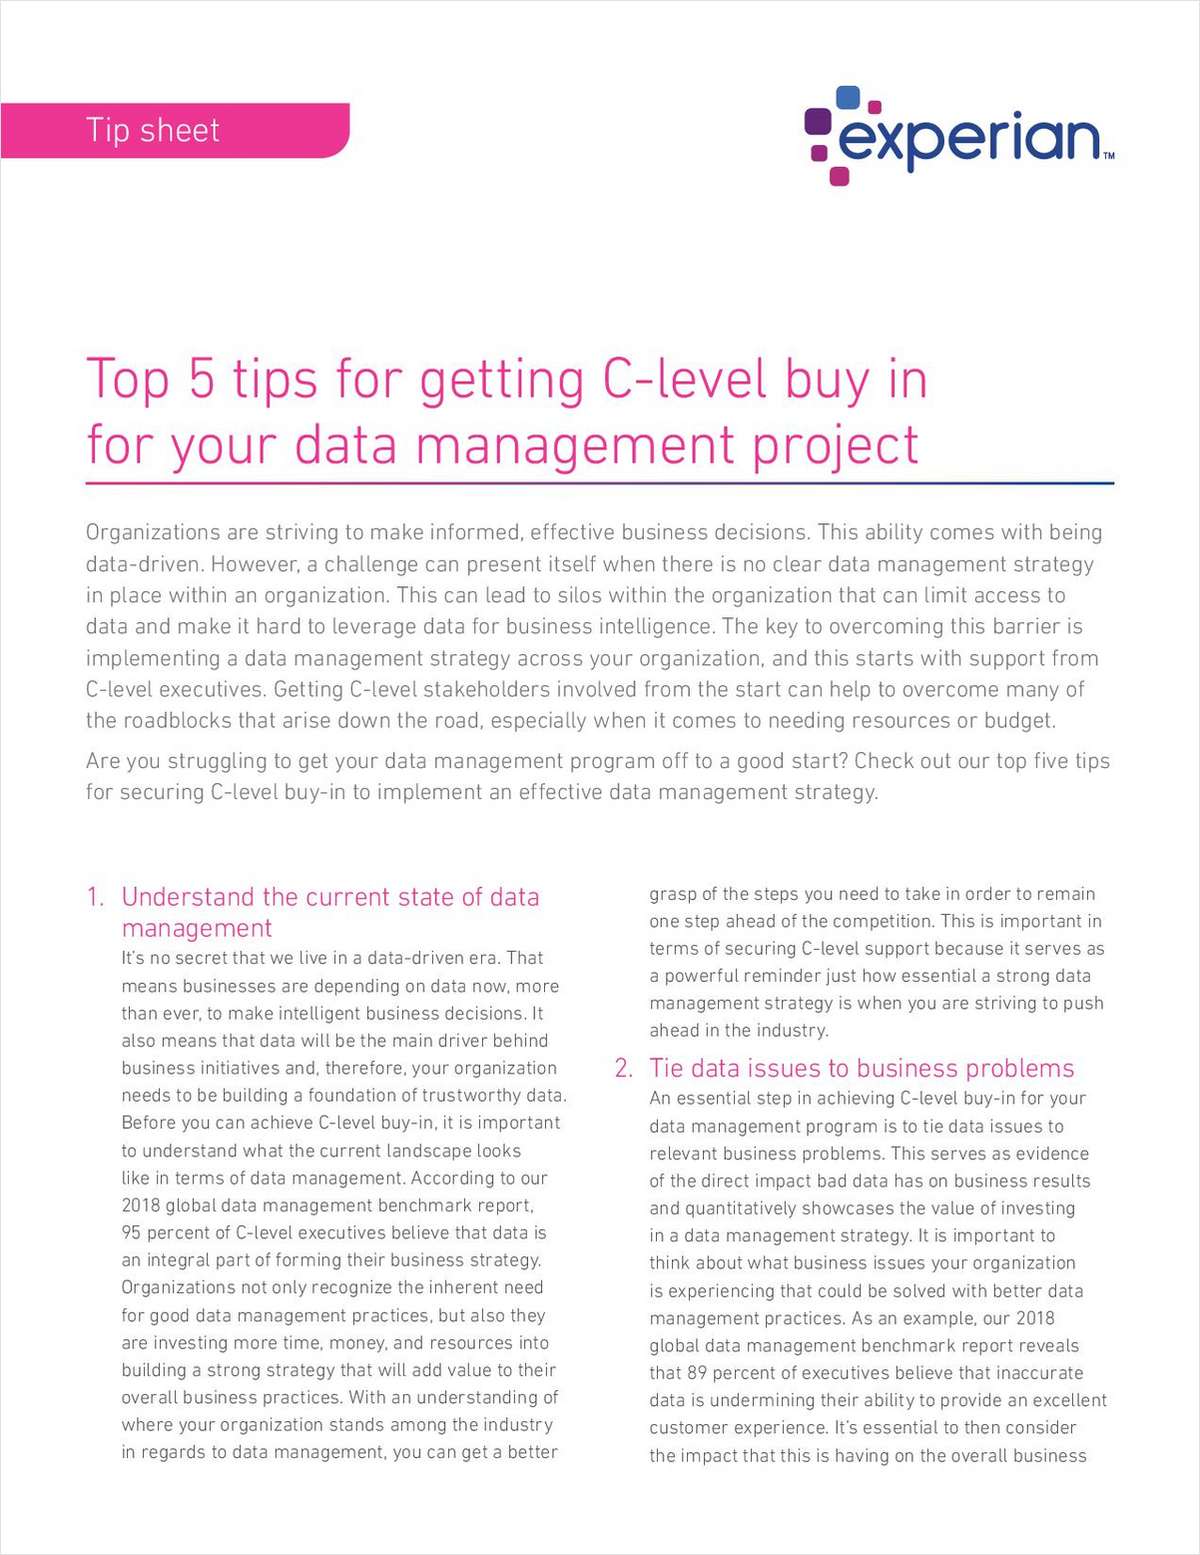 Top 5 tips for getting C-level buy in for your data management